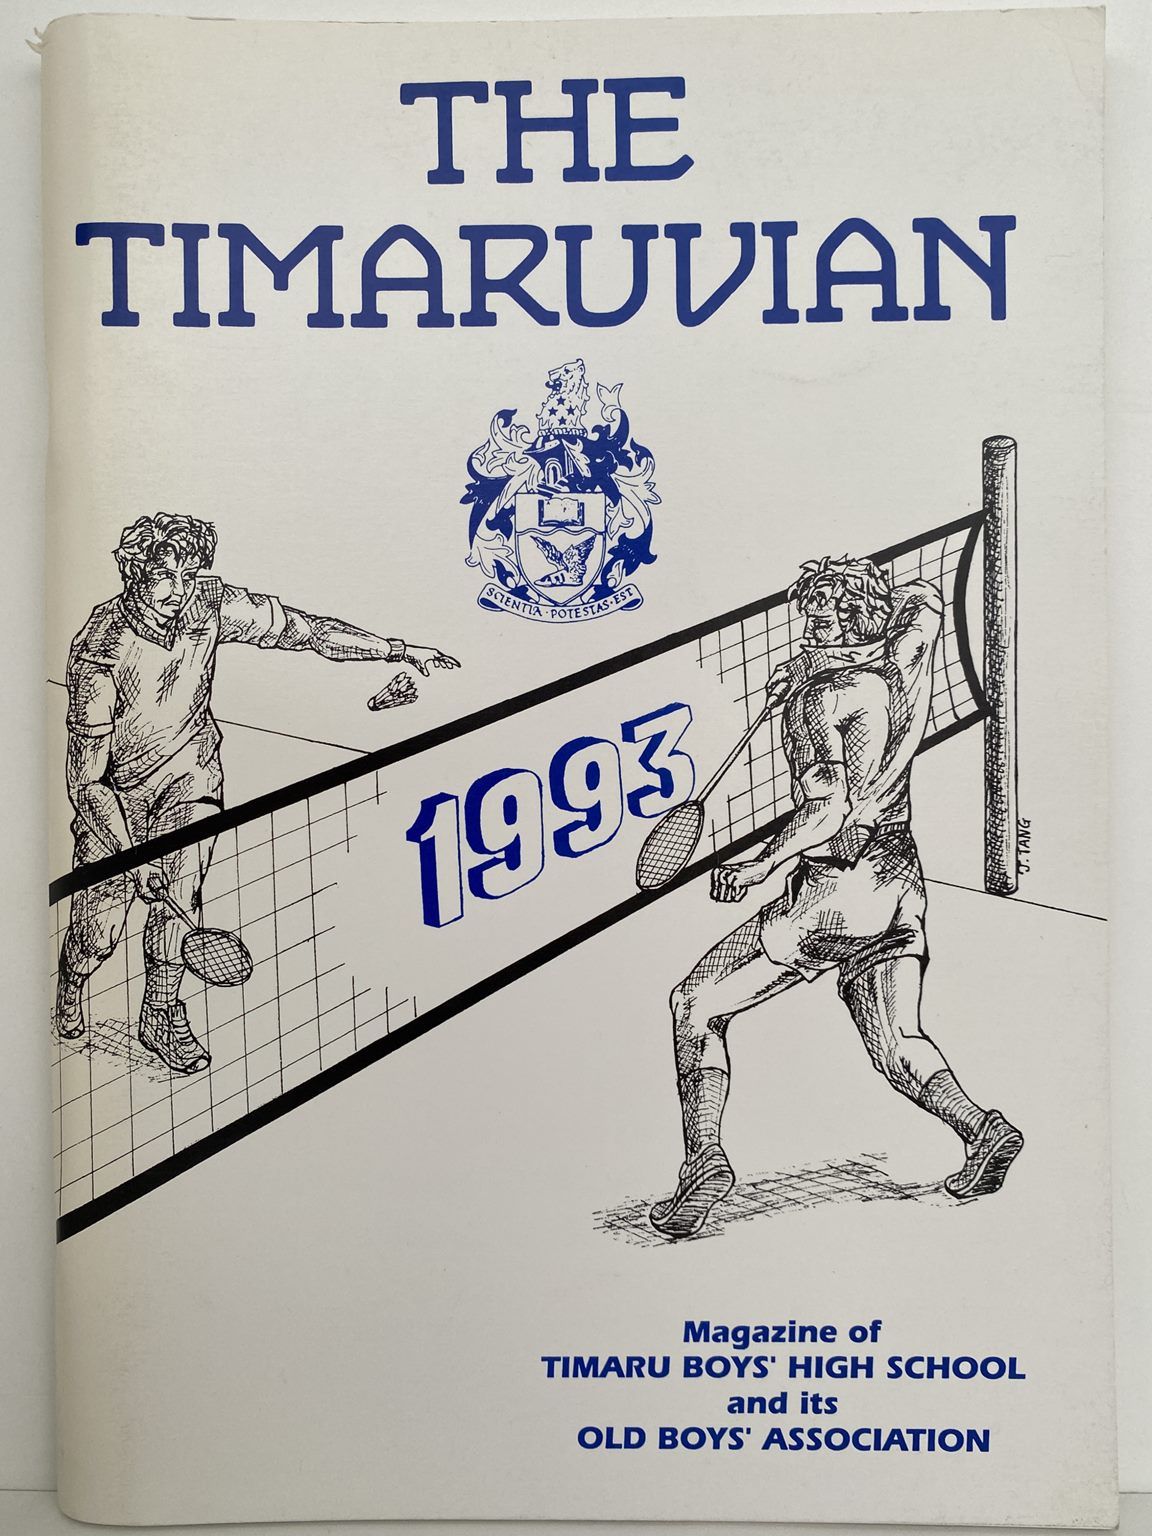 THE TIMARUVIAN: Magazine of the Timaru Boys' High School and its Old Boys' Association 1993